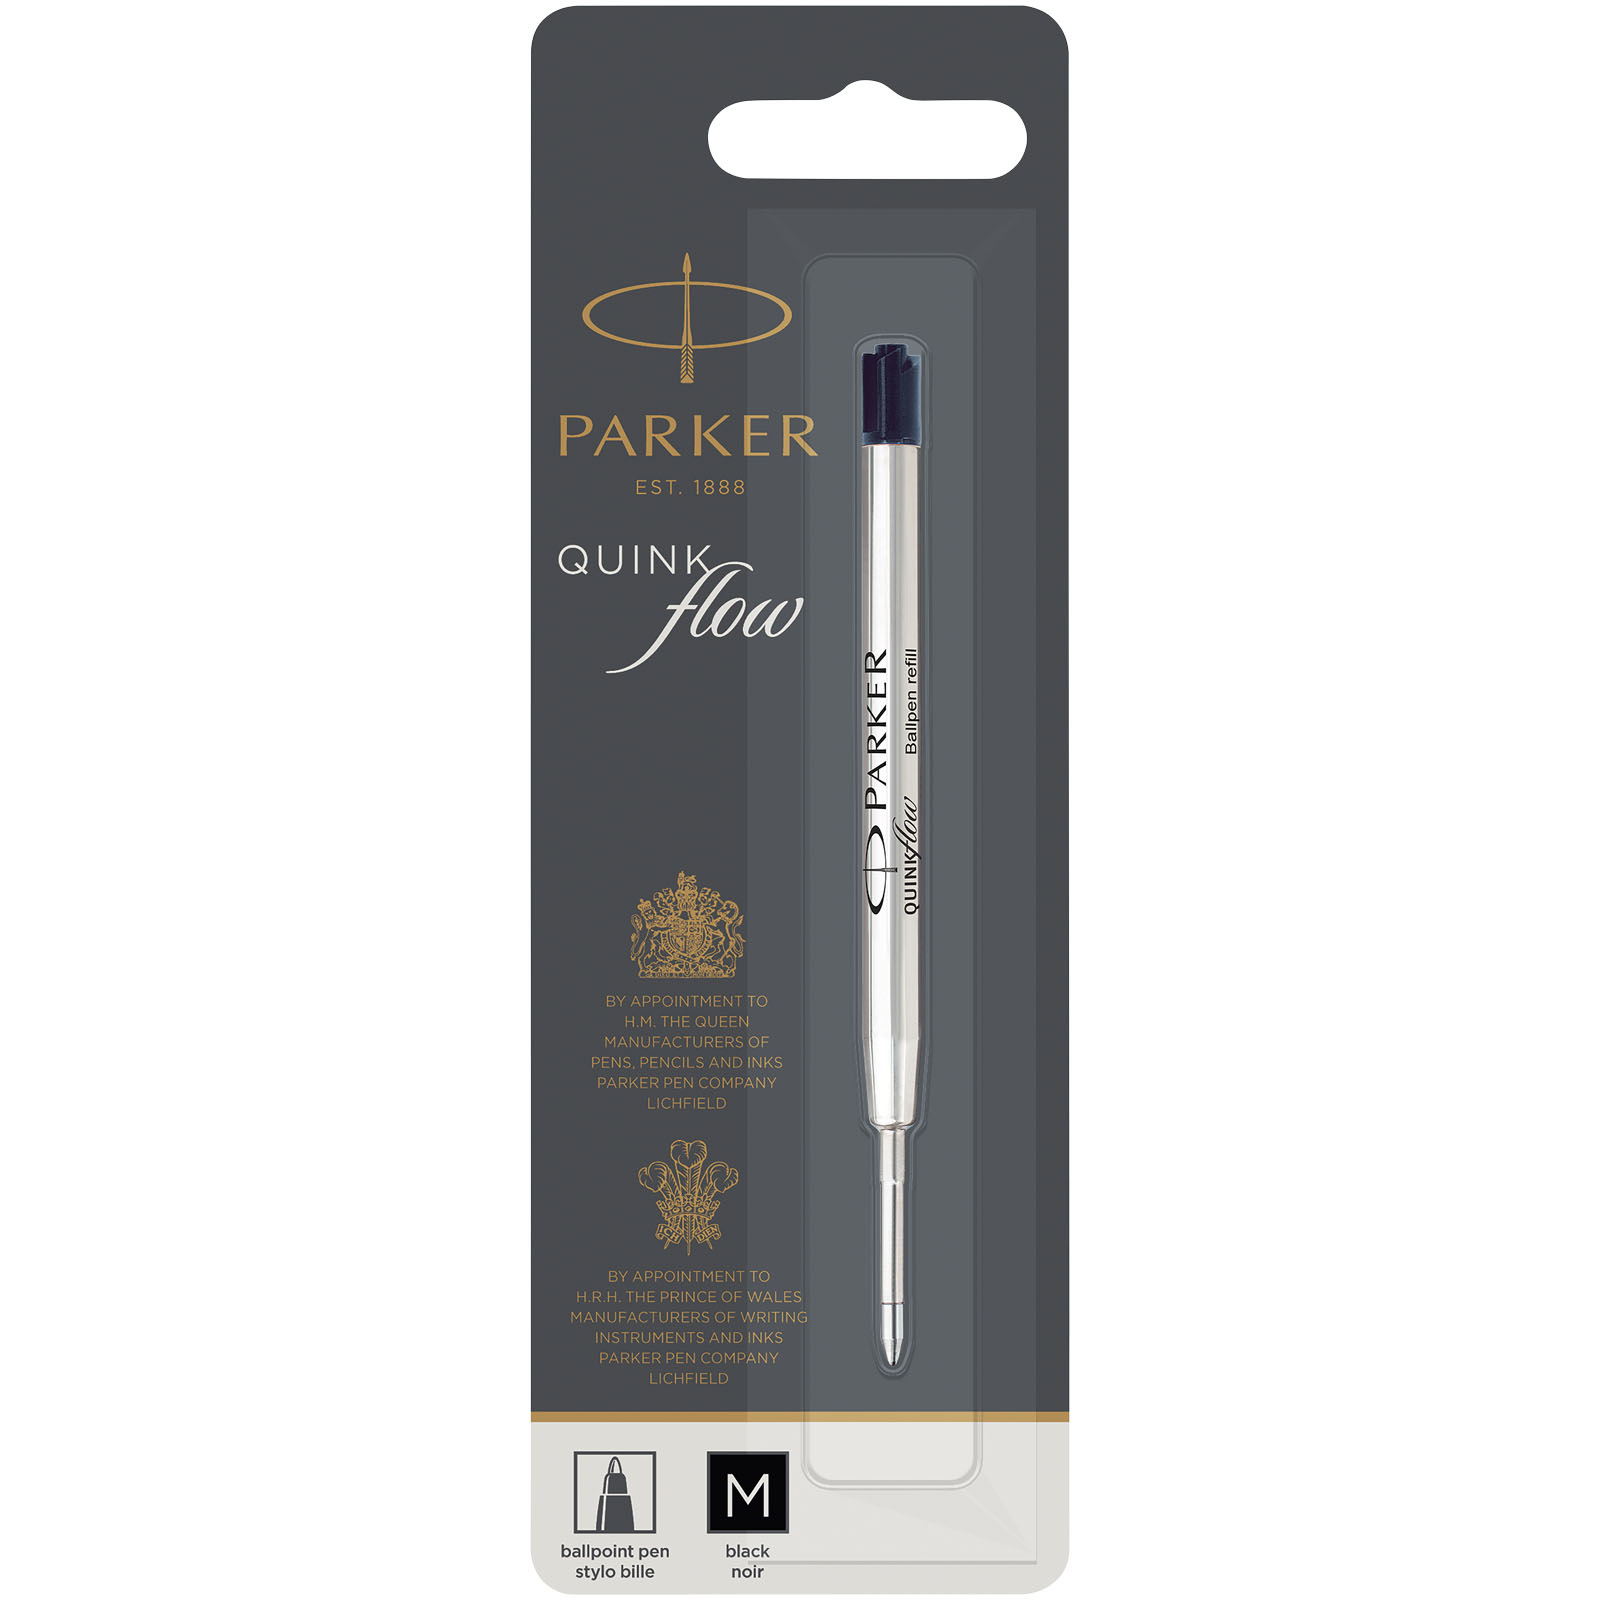 Advertising Other Pens & Writing Accessories - Parker Quinkflow ballpoint pen refill